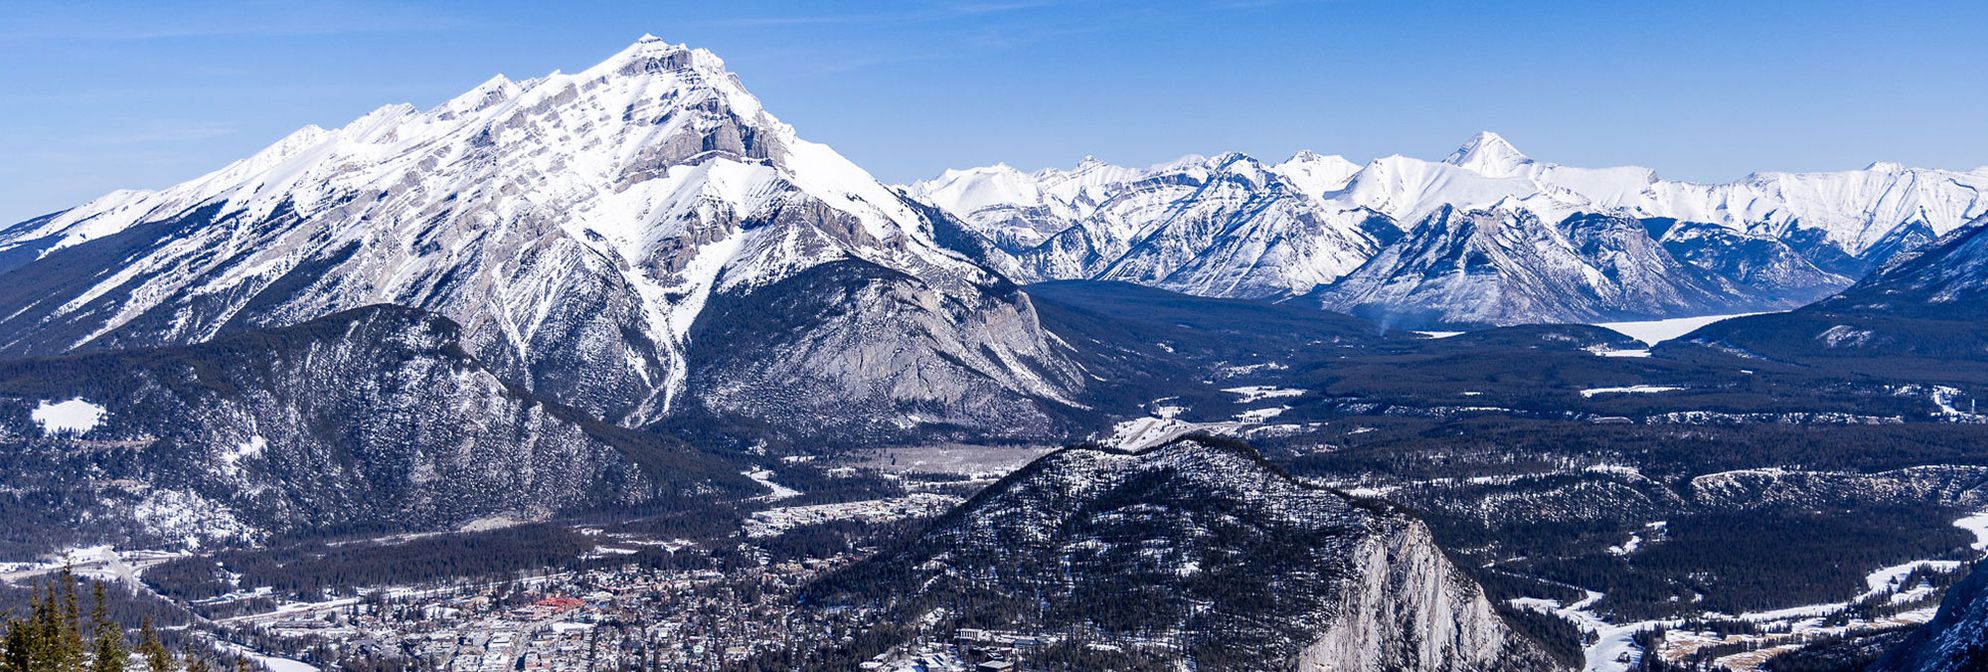 The Banff Townsite from the Banff Gondola with Tunnel Mountain and Cascade Mountain in Banff National Park.